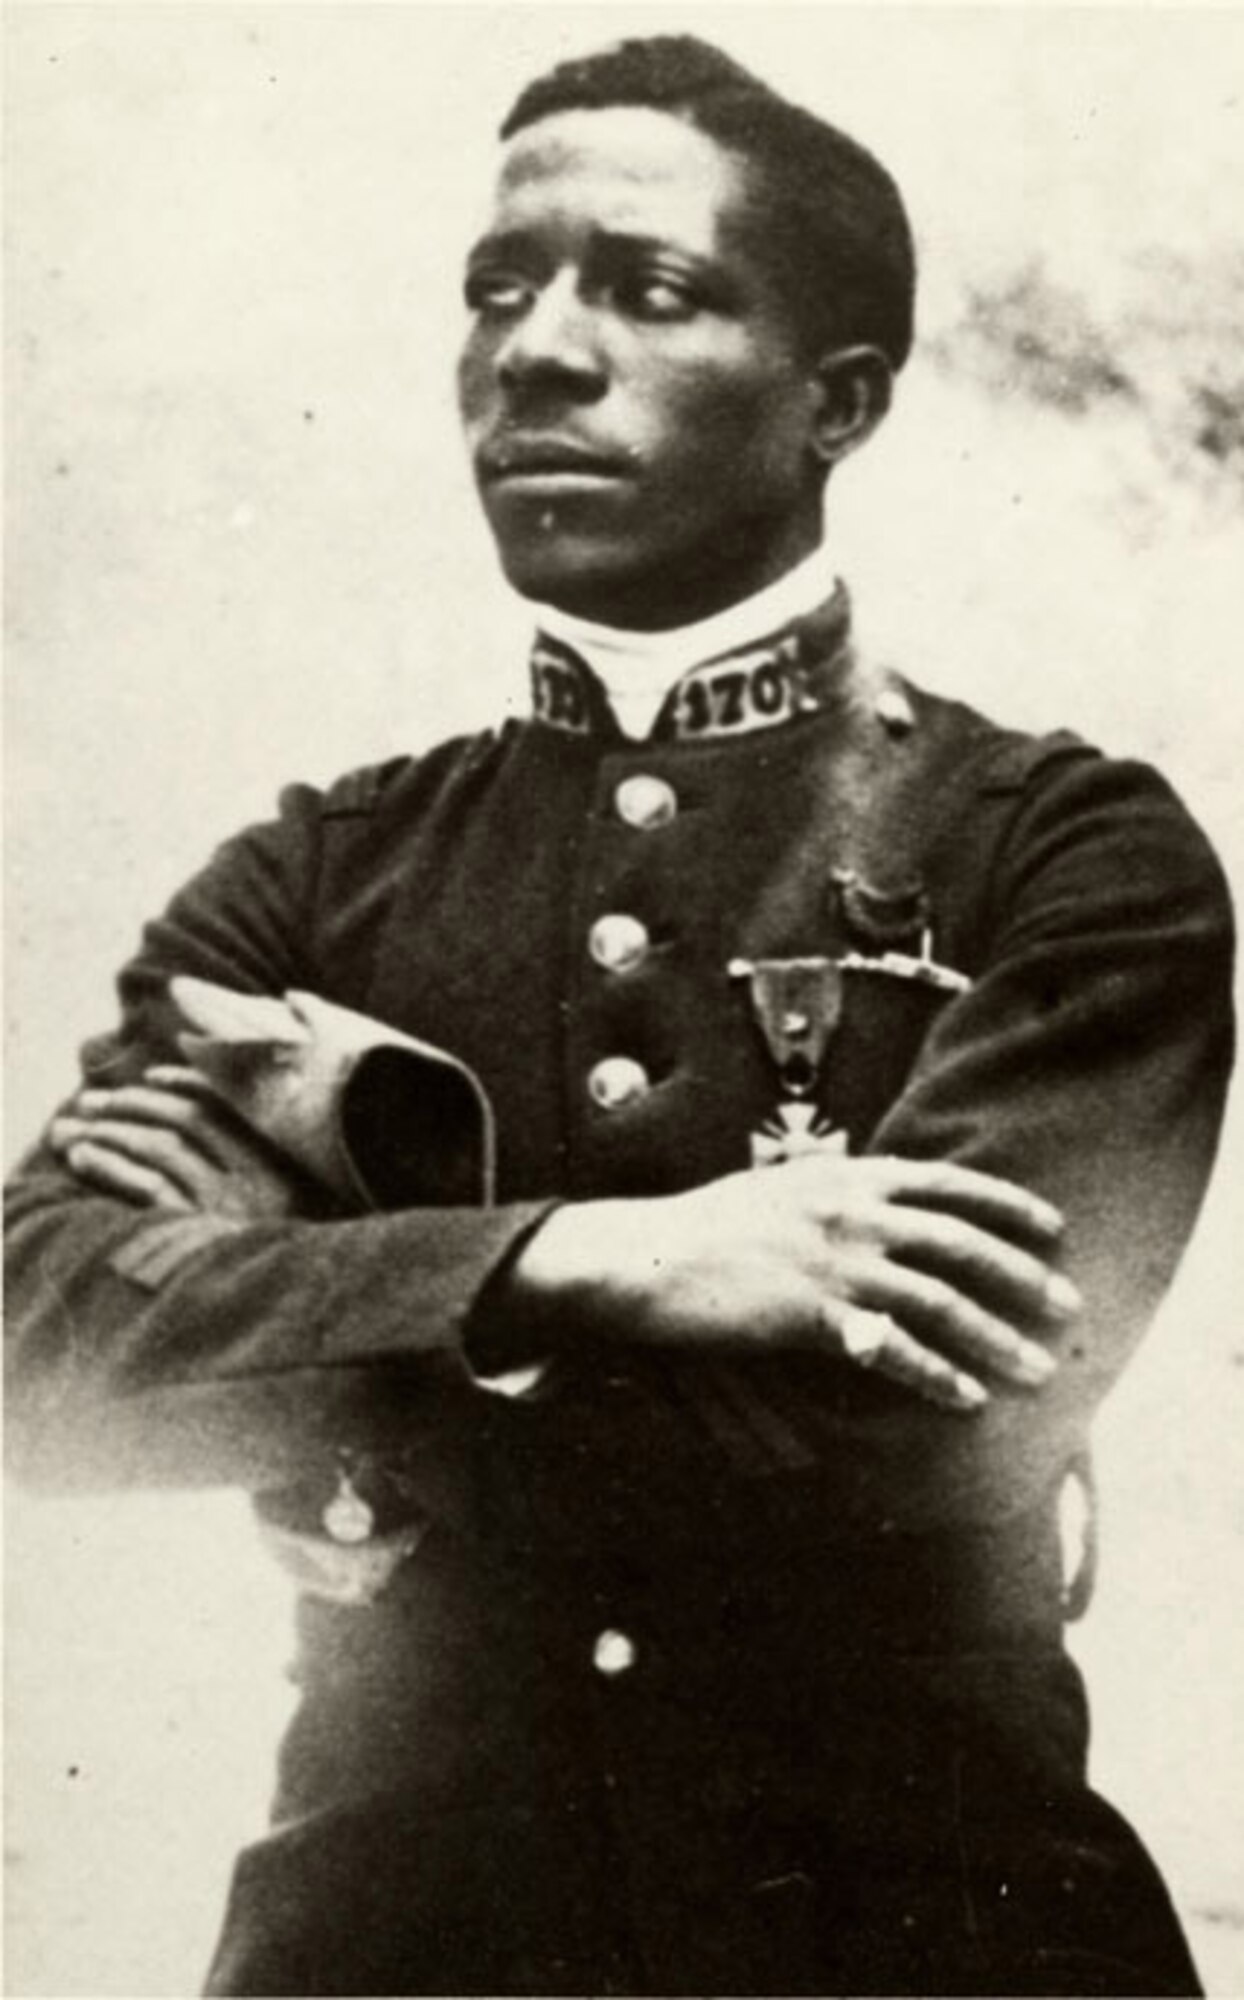 Photographed above is Eugene Bullard, the world's first black pilot and fighter pilot. (Photo provided from the 49th Fighter Wing History office)